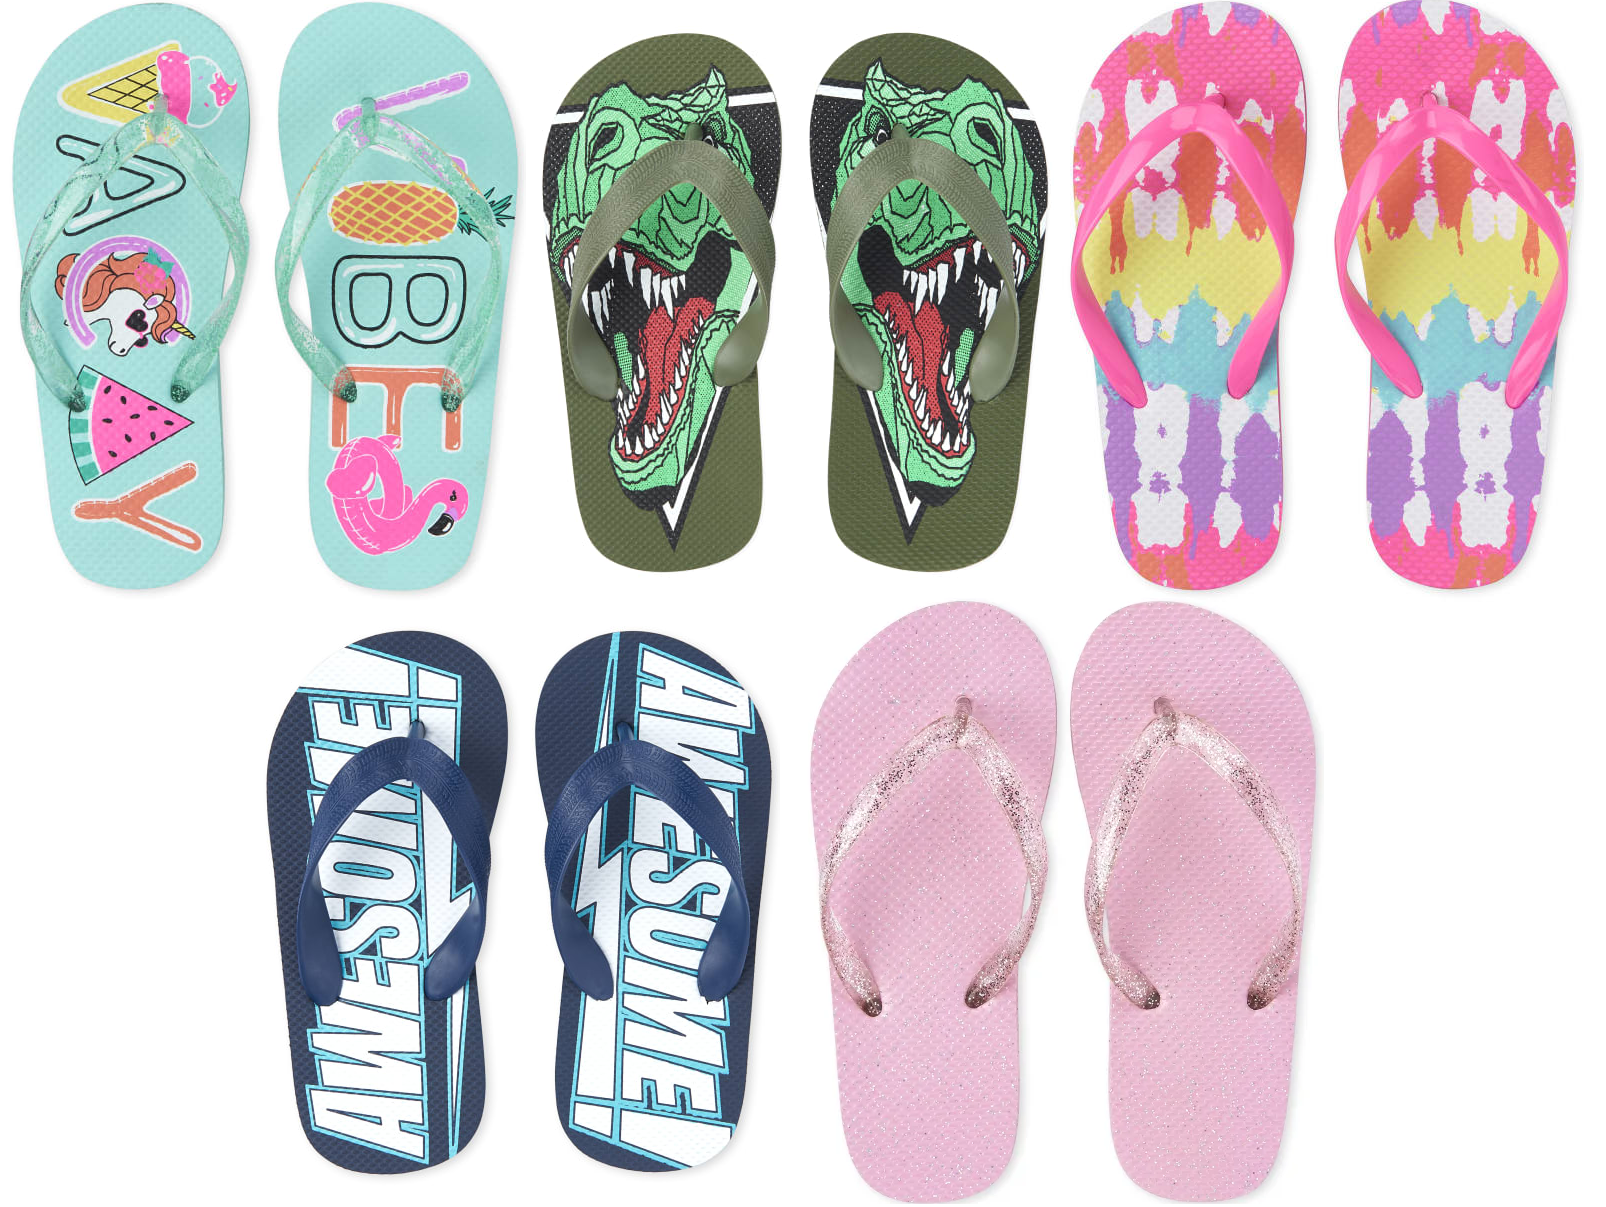 The Children’s Place – Flip Flops just .19 + Free Shipping!